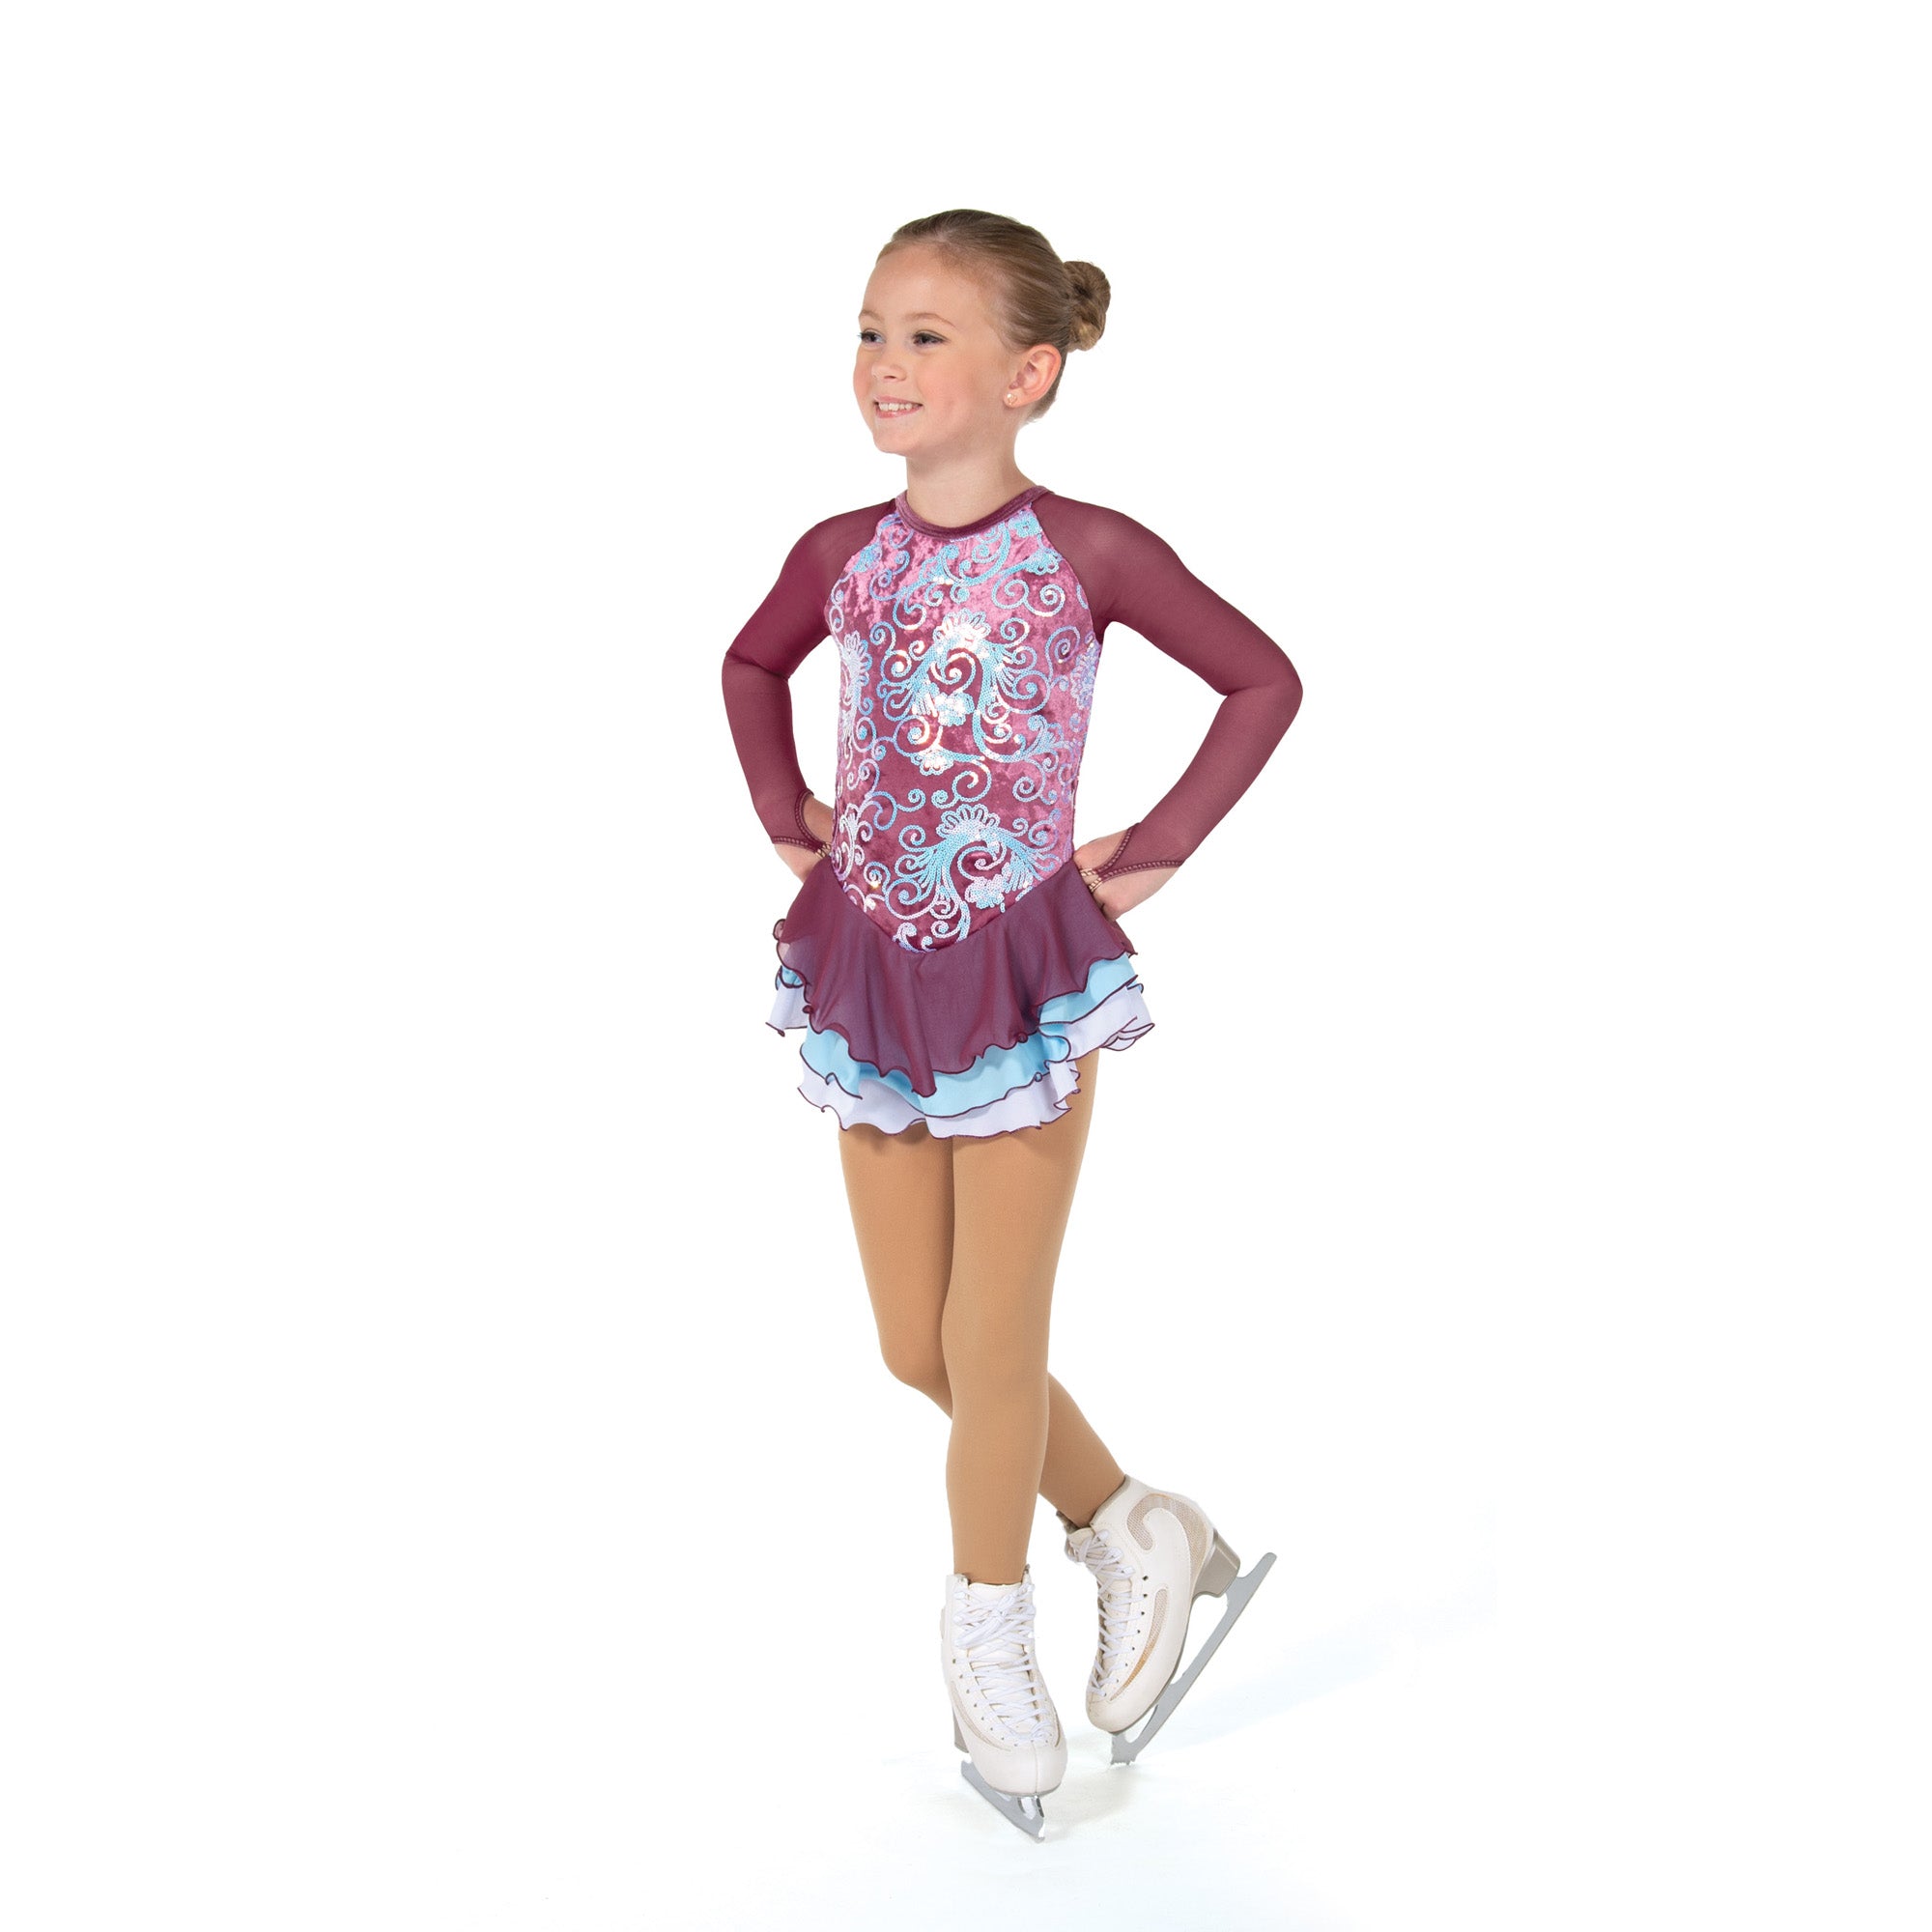 636 Sequin Sea Queen Skating Dress in Plum by Jerry's